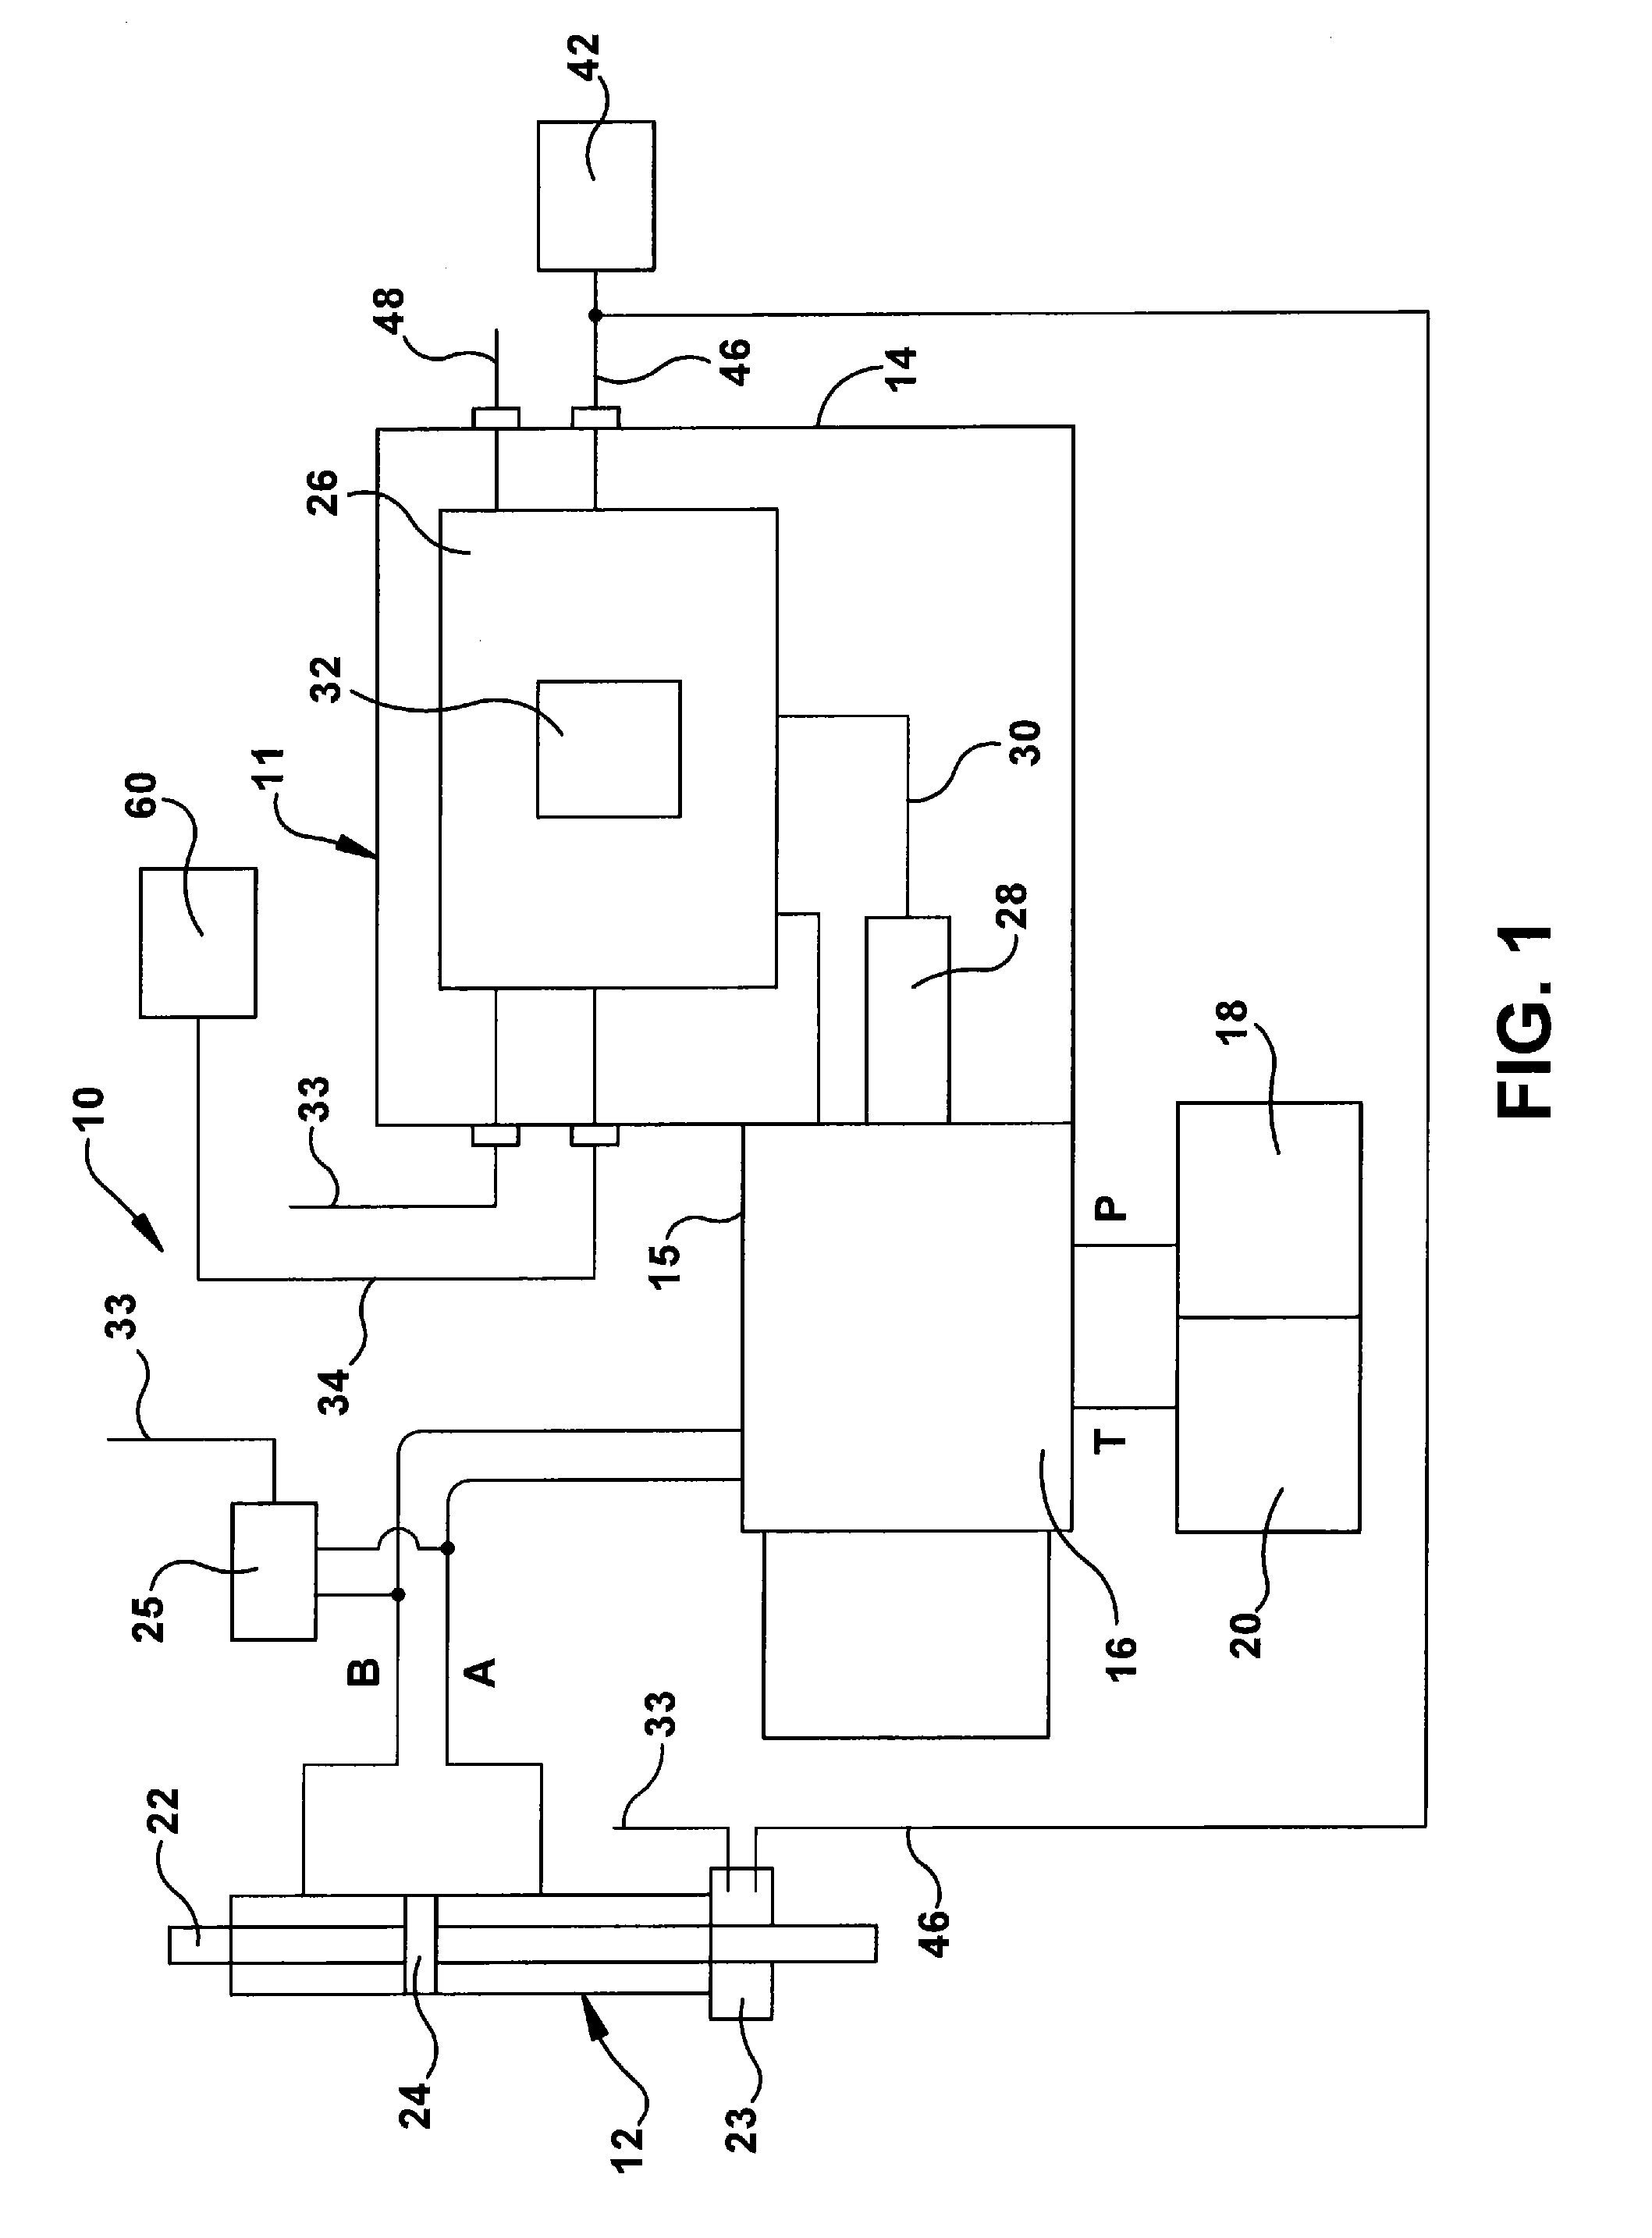 Device and method for controlling a fluid actuator